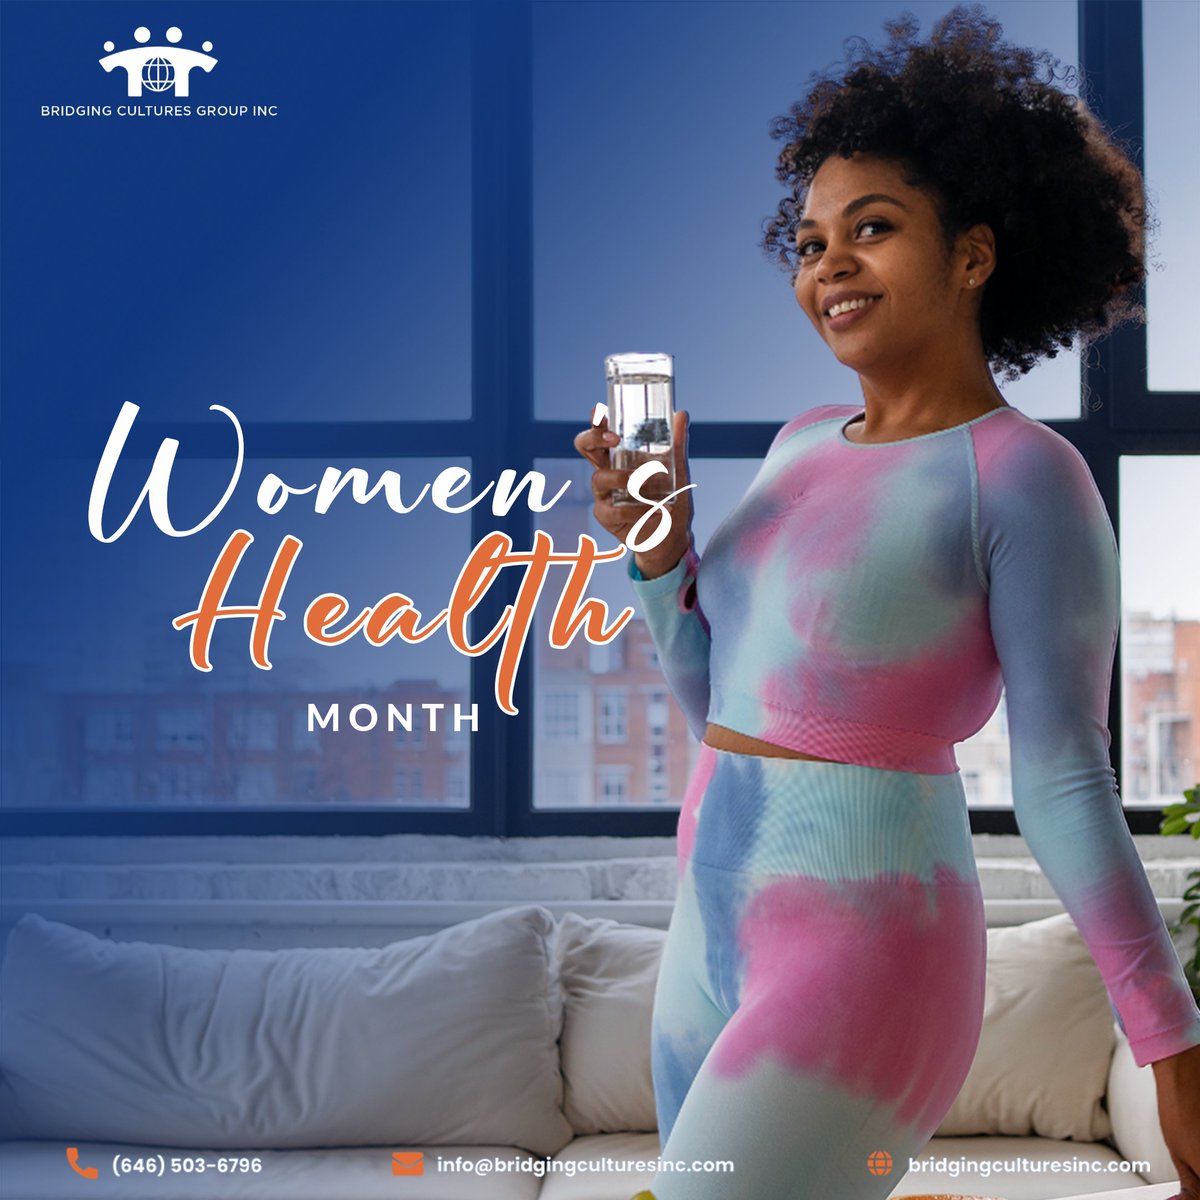 May is Women's Health Month. we champion the health and well-being of women everywhere. Let's empower and educate ourselves on women's health needs and advocate for better healthcare access.

#BCG #DEI #WomensHealthMonth #EmpowerWomen #HealthAwareness